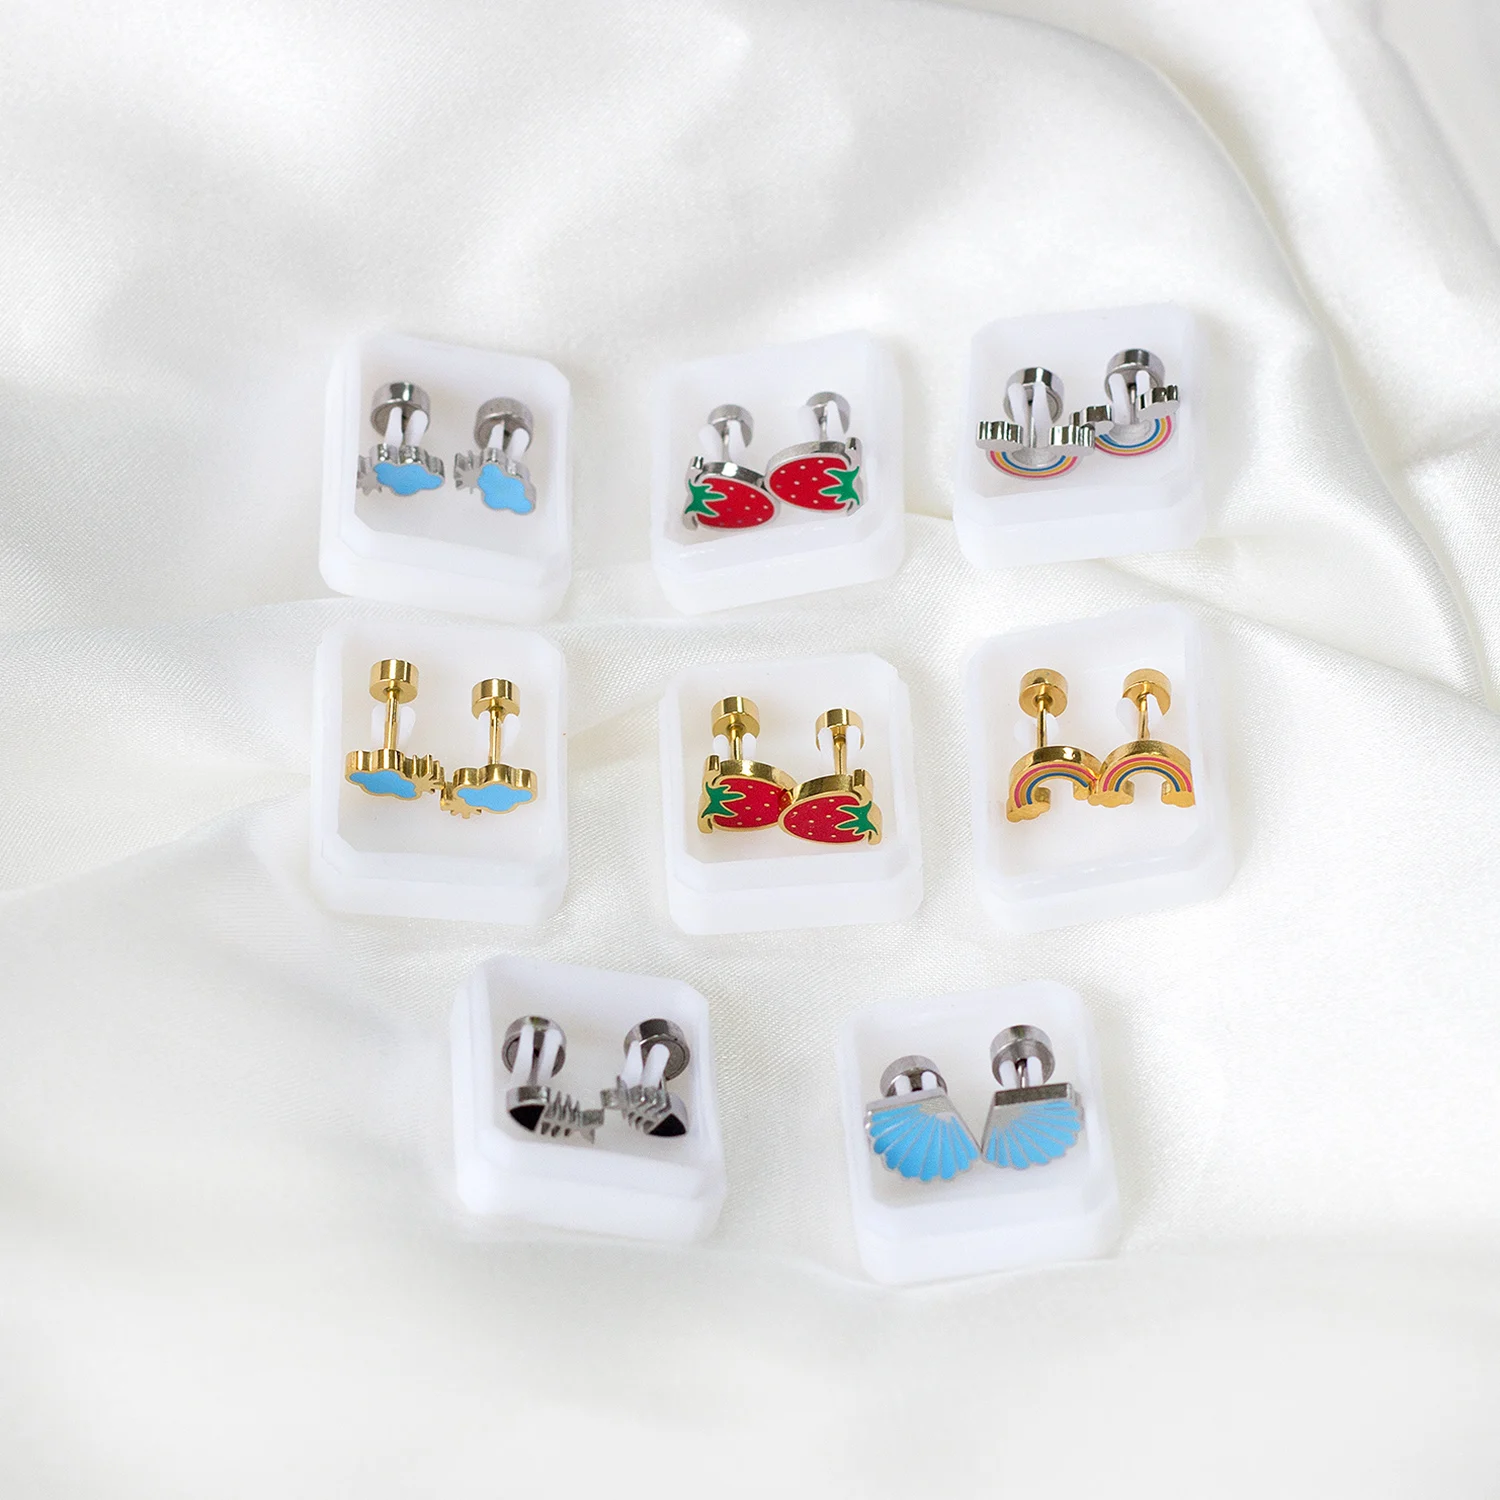 

Baby Earrings Gold Plated Stainless Steel Small Cute Screw Back Anti-allergic Jewelry for Girls, Gold/silver available